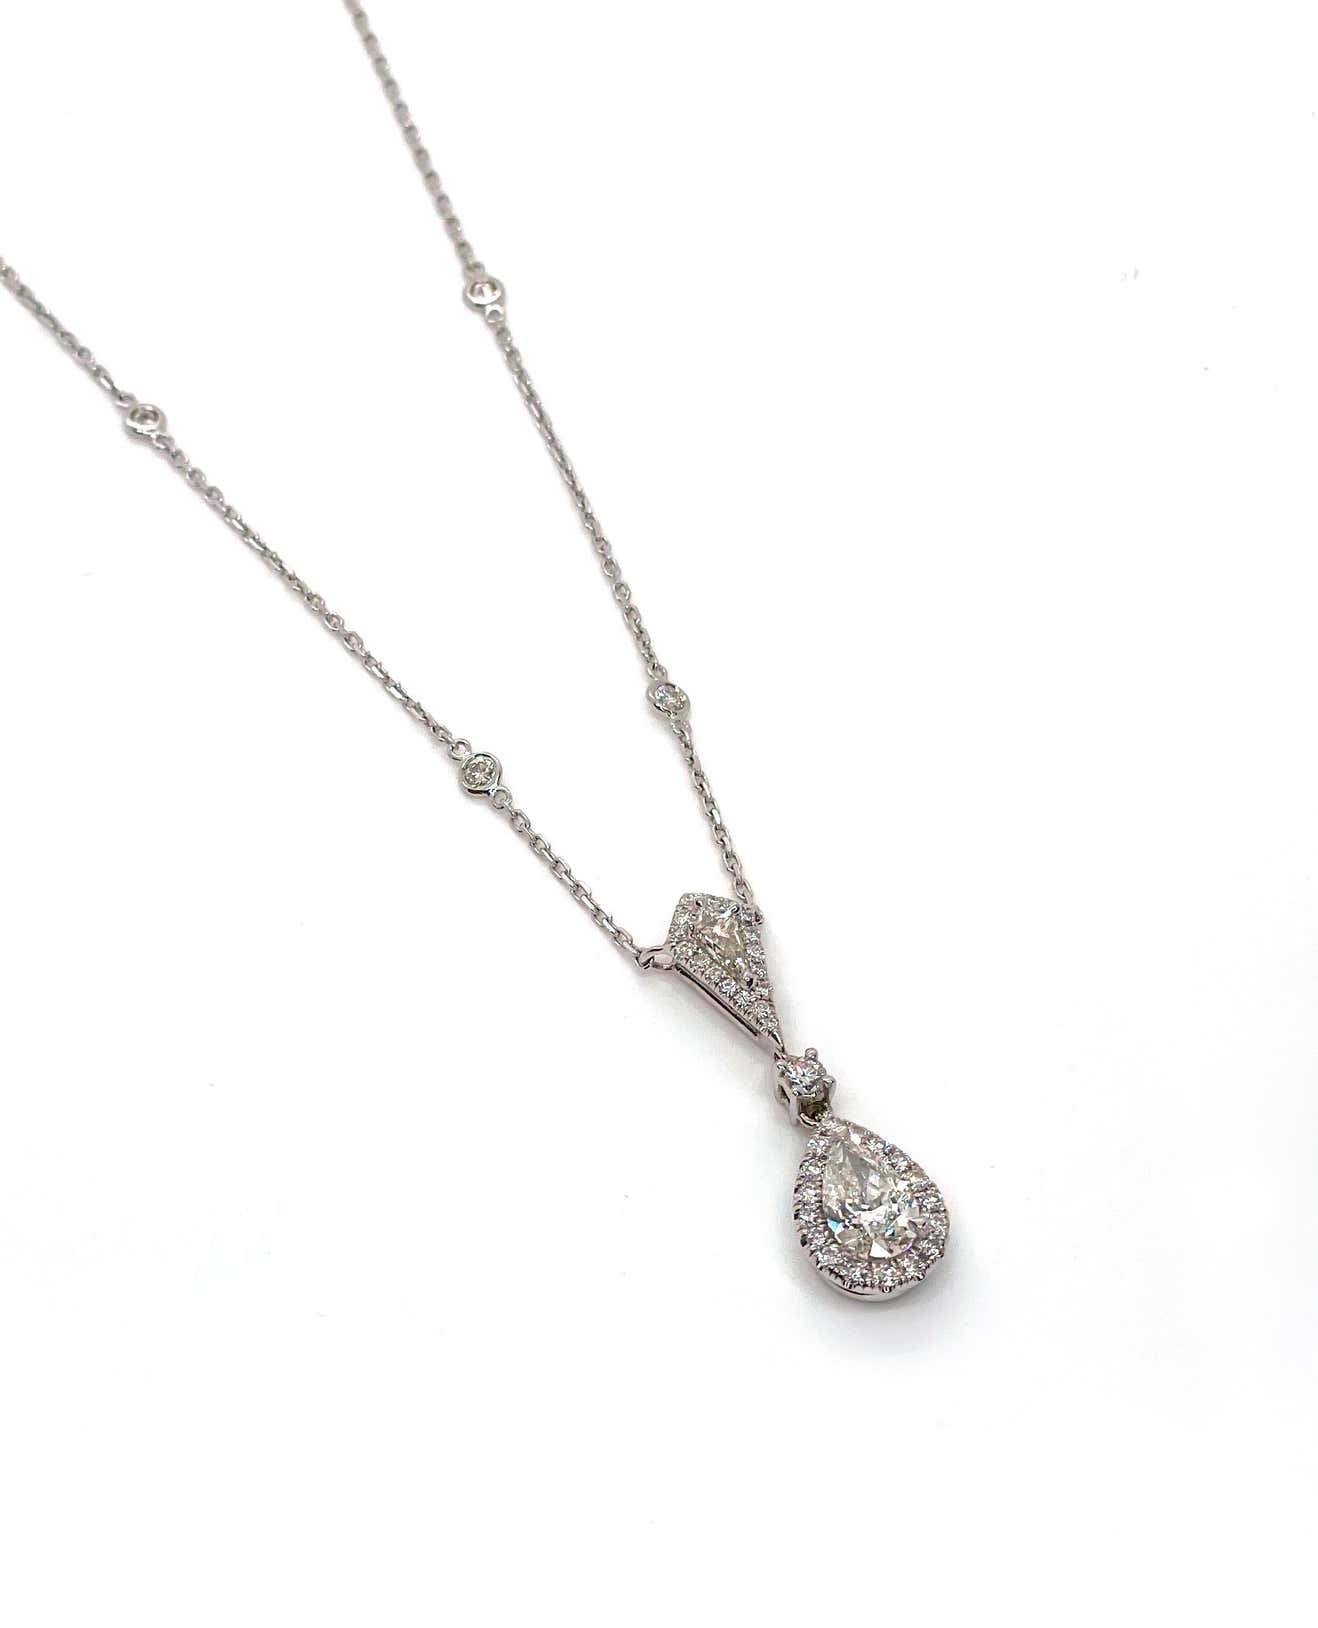 Pear Shaped Diamond Necklace in 18K White Gold (Watch Video)